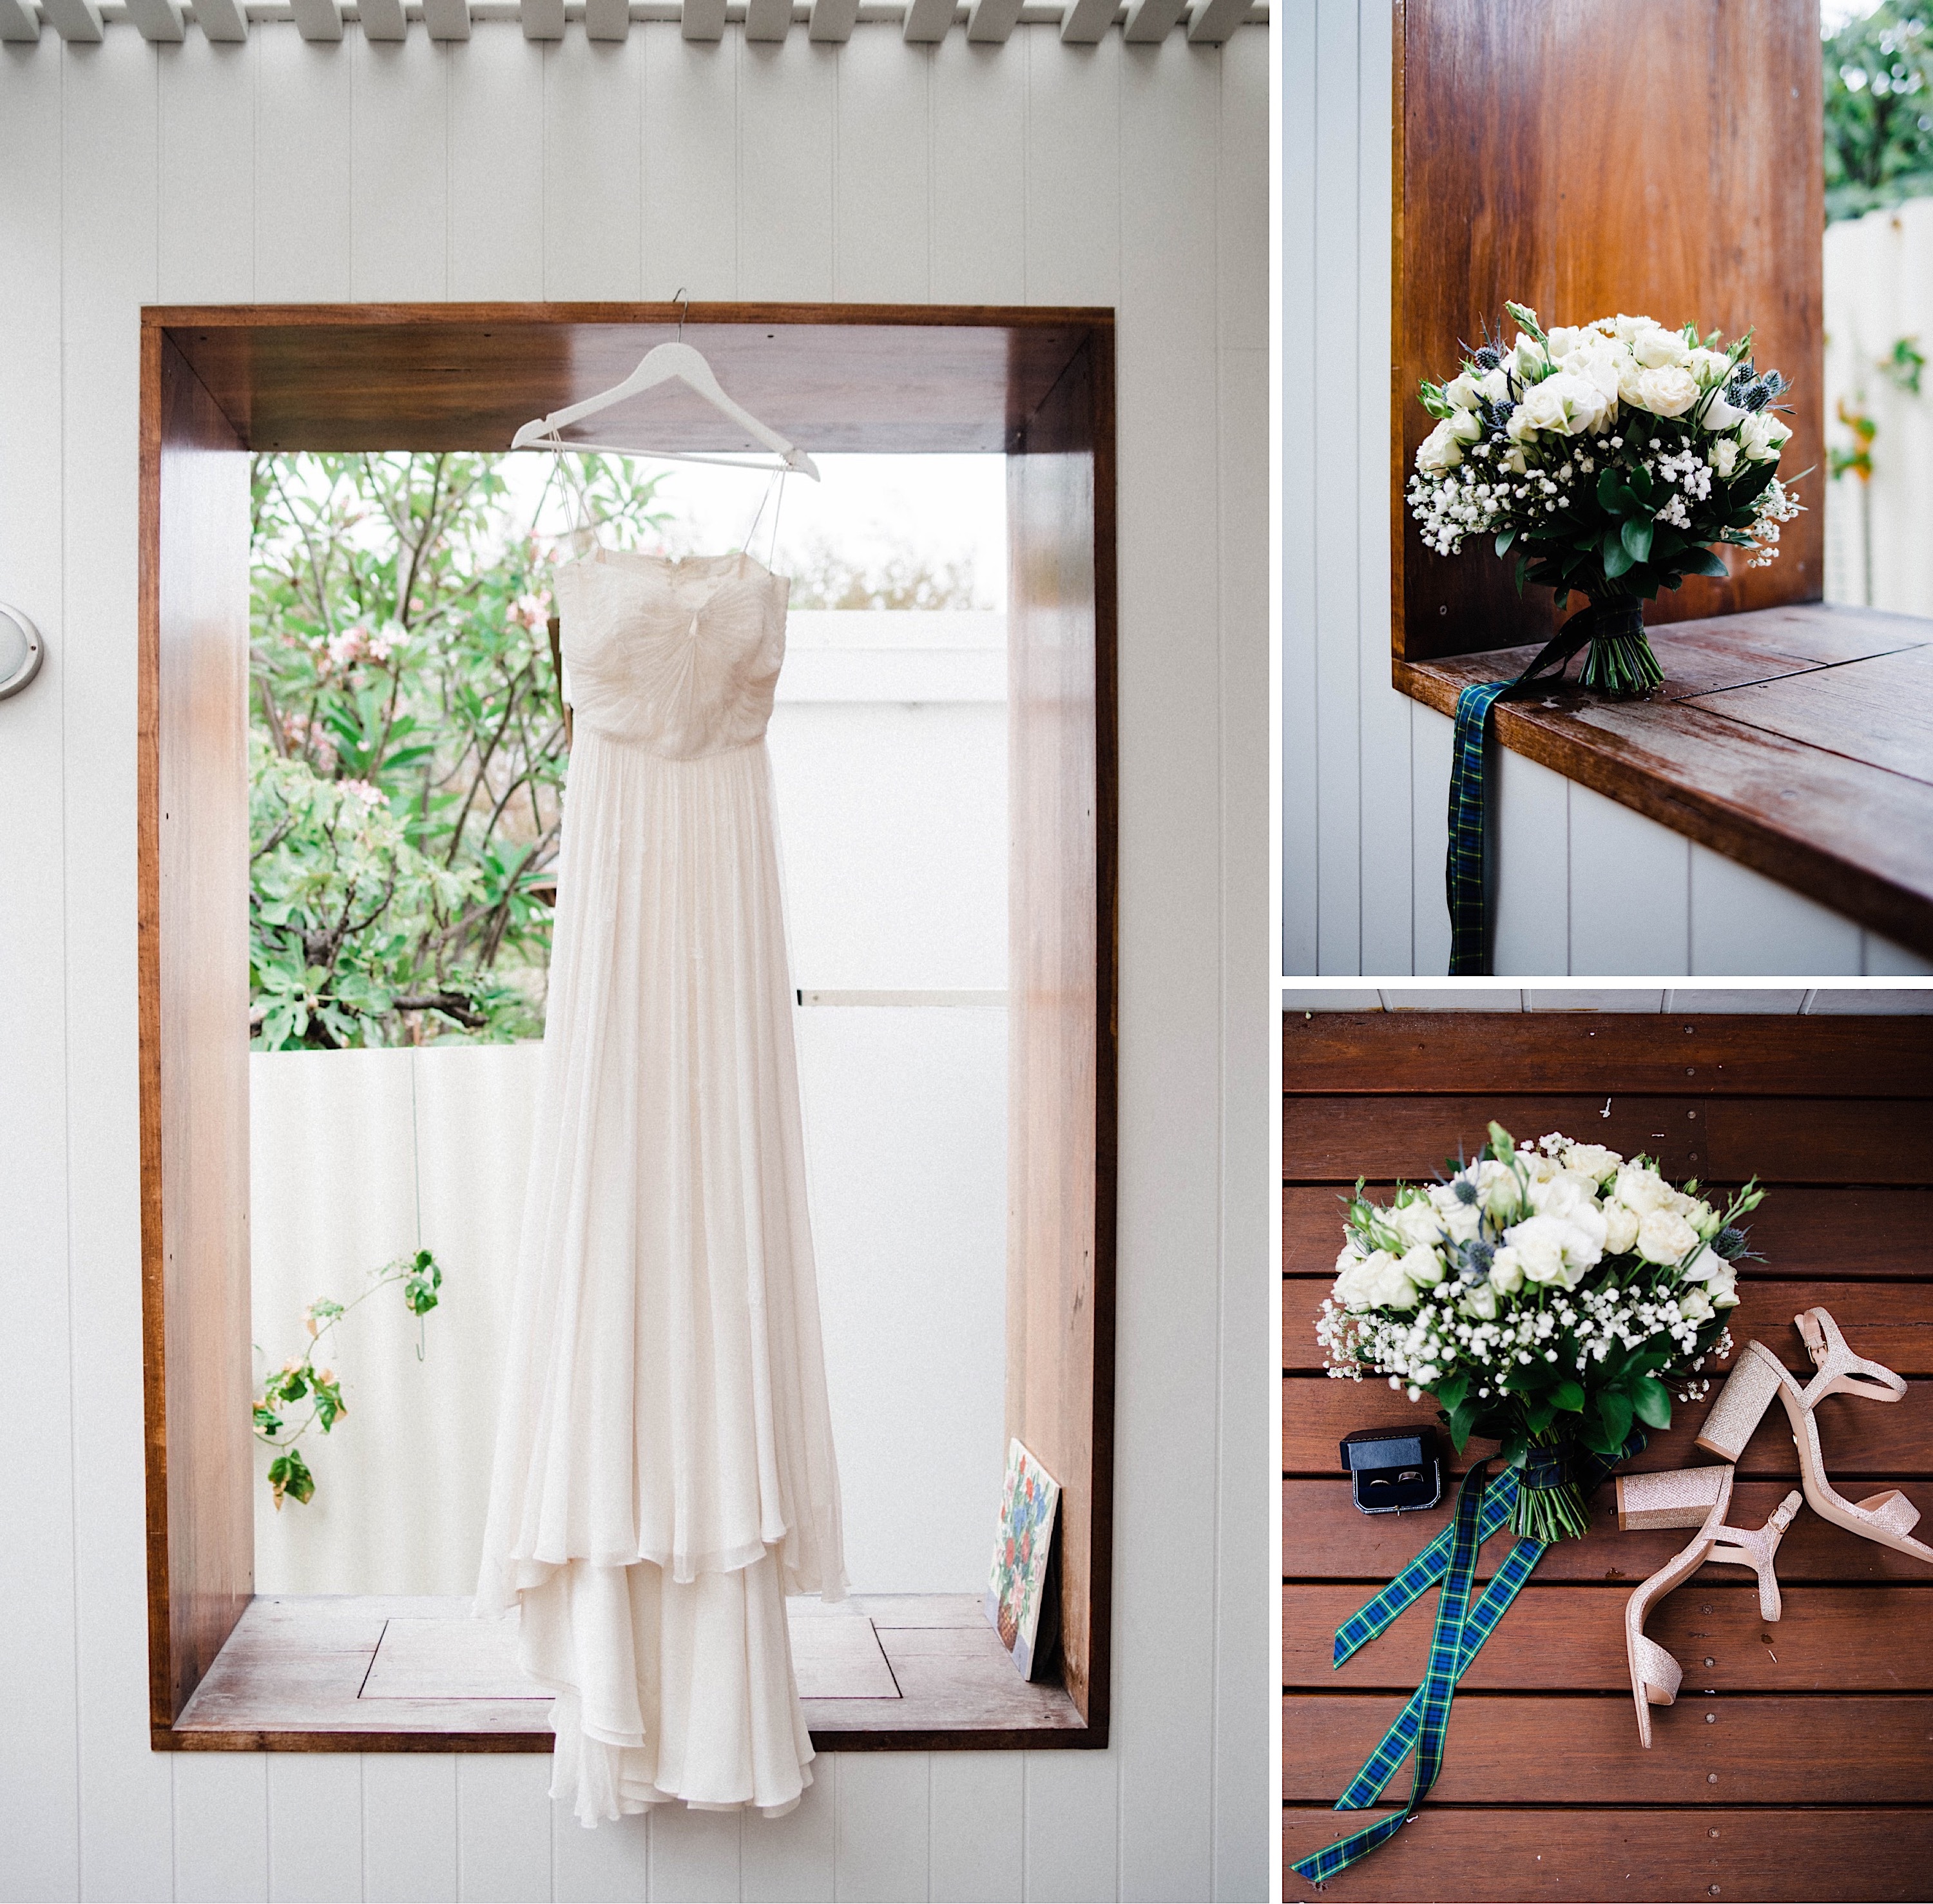 A collage of images from a Sustainable Backyard Wedding, featuring a second hand Jenny Packham dress hanging outside, the bridal bouquet and the bride's shoes.